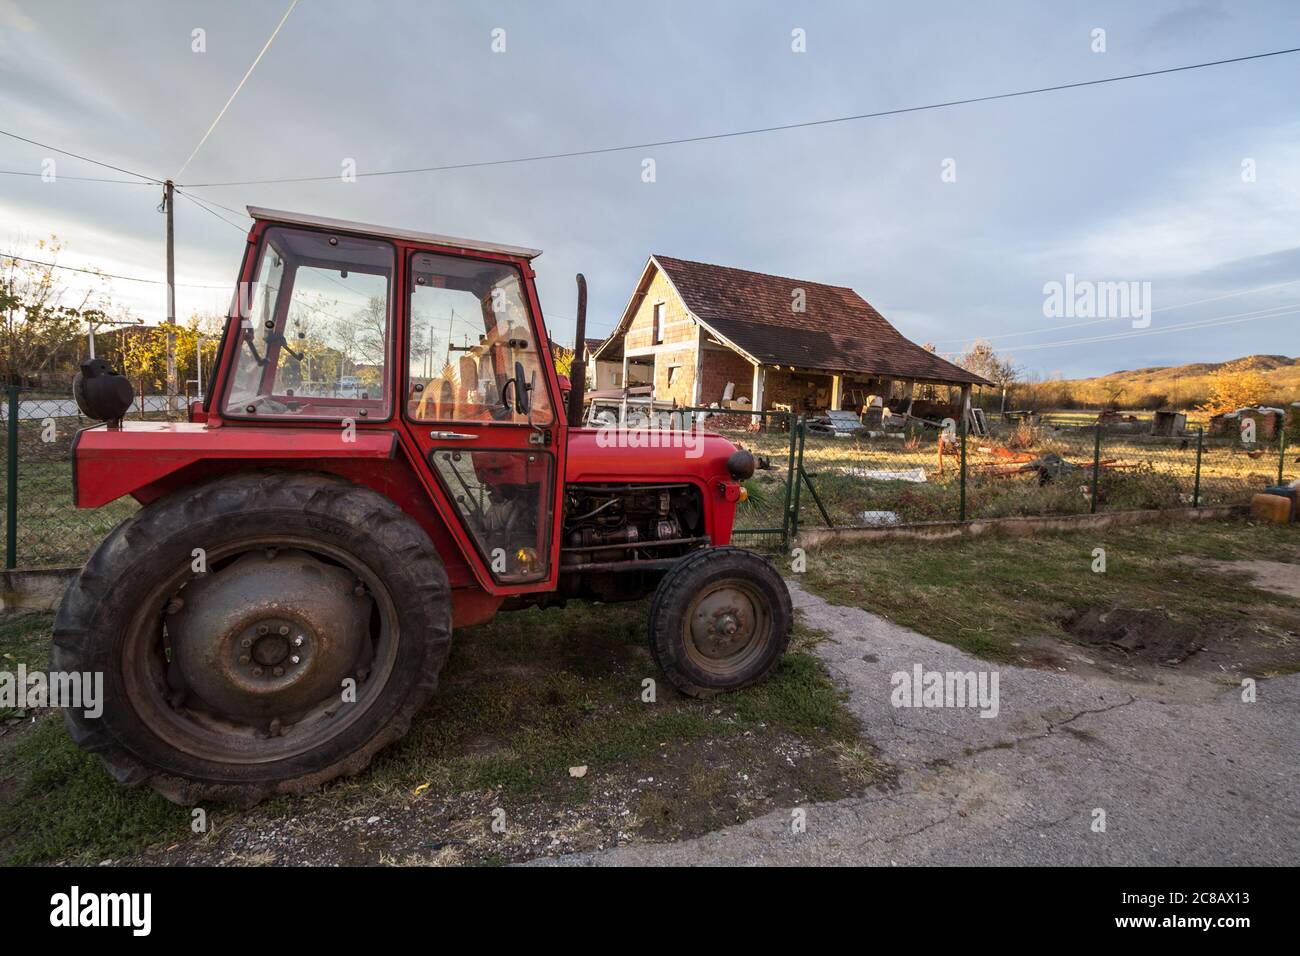 KRALJEVO, SERBIA - NOVEMBER 10, 2019: Tractor in front of a farm in the countryside of Serbia, in a typical rural agricultural land of the region of S Stock Photo